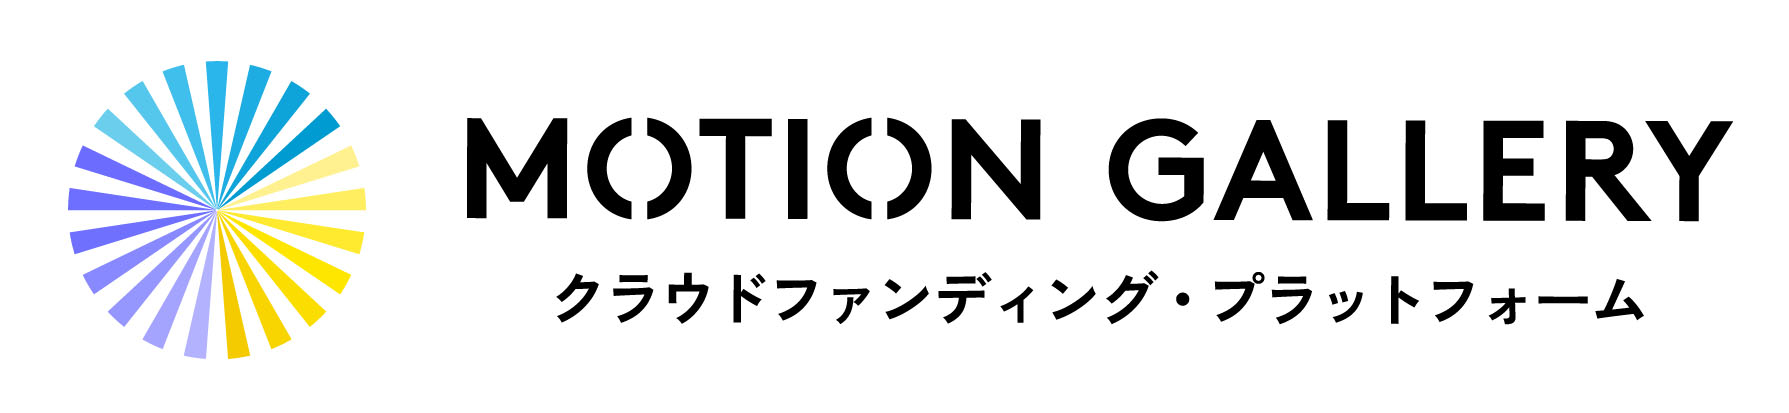 motiongallery